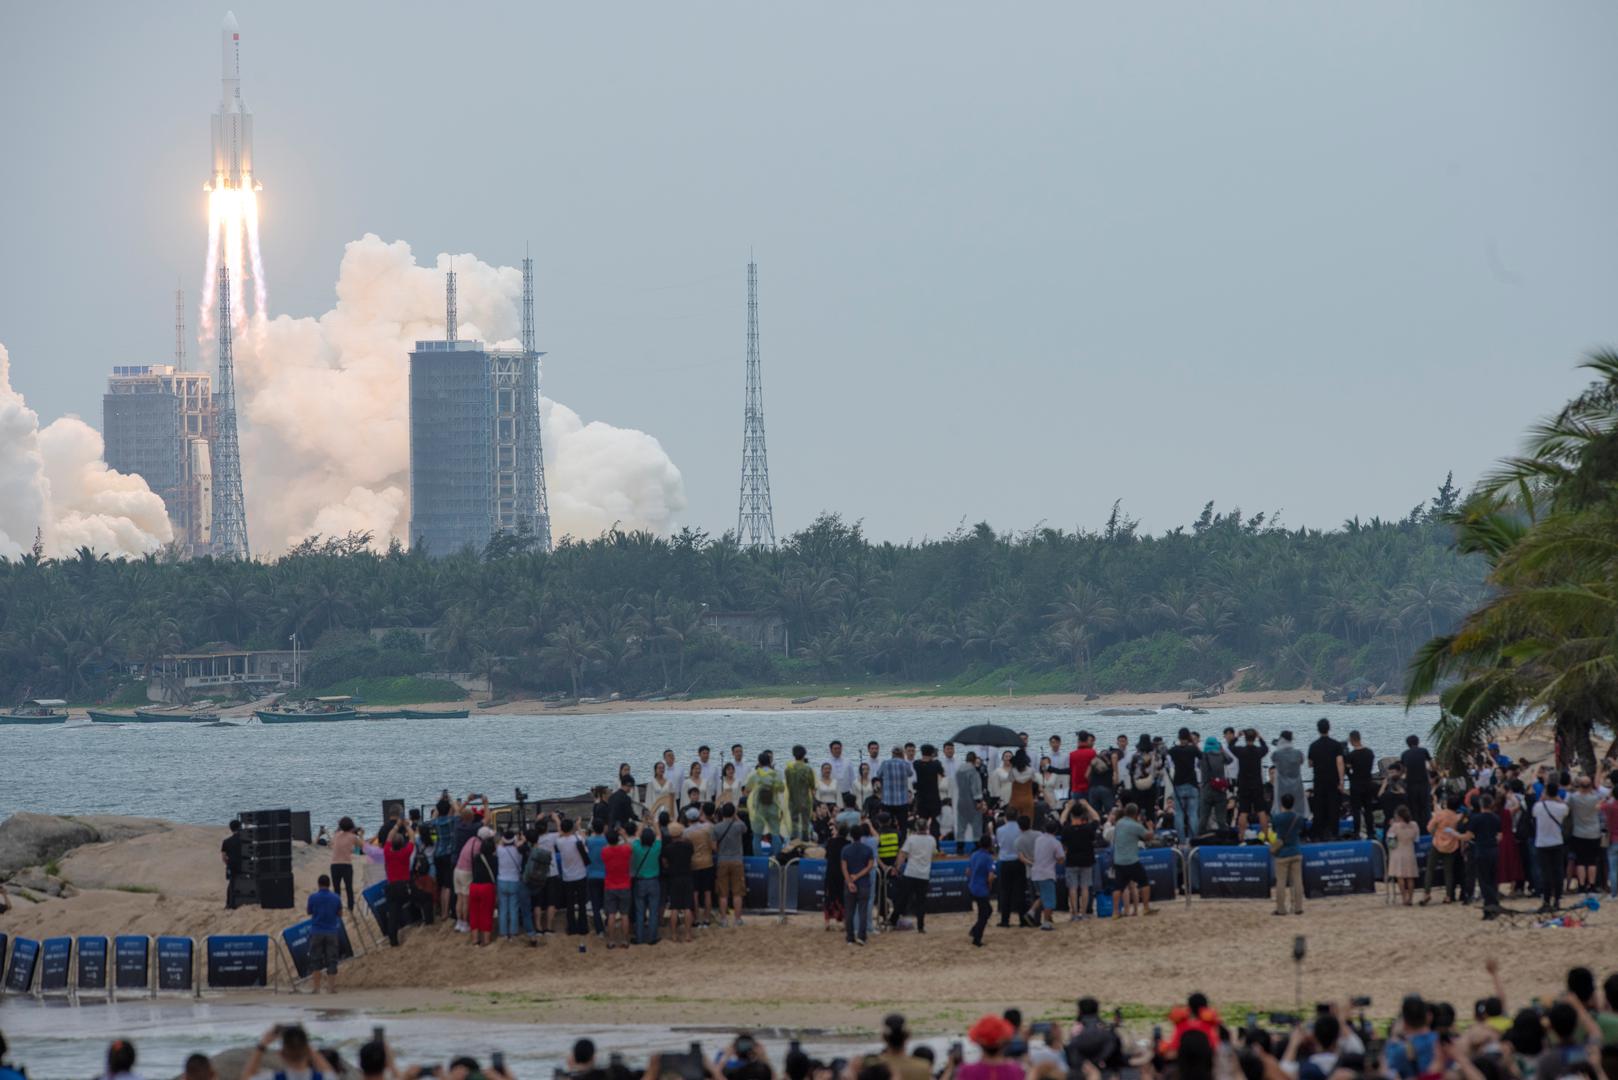 People watch from a beach as the Long March-5B Y2 rocket, carrying the core module of China's space station Tianhe, takes off from Wenchang People watch from a beach as the Long March-5B Y2 rocket, carrying the core module of China's space station Tianhe, takes off from Wenchang Space Launch Center in Hainan province, China April 29, 2021. China Daily via REUTERS  ATTENTION EDITORS - THIS IMAGE WAS PROVIDED BY A THIRD PARTY. CHINA OUT. CHINA DAILY